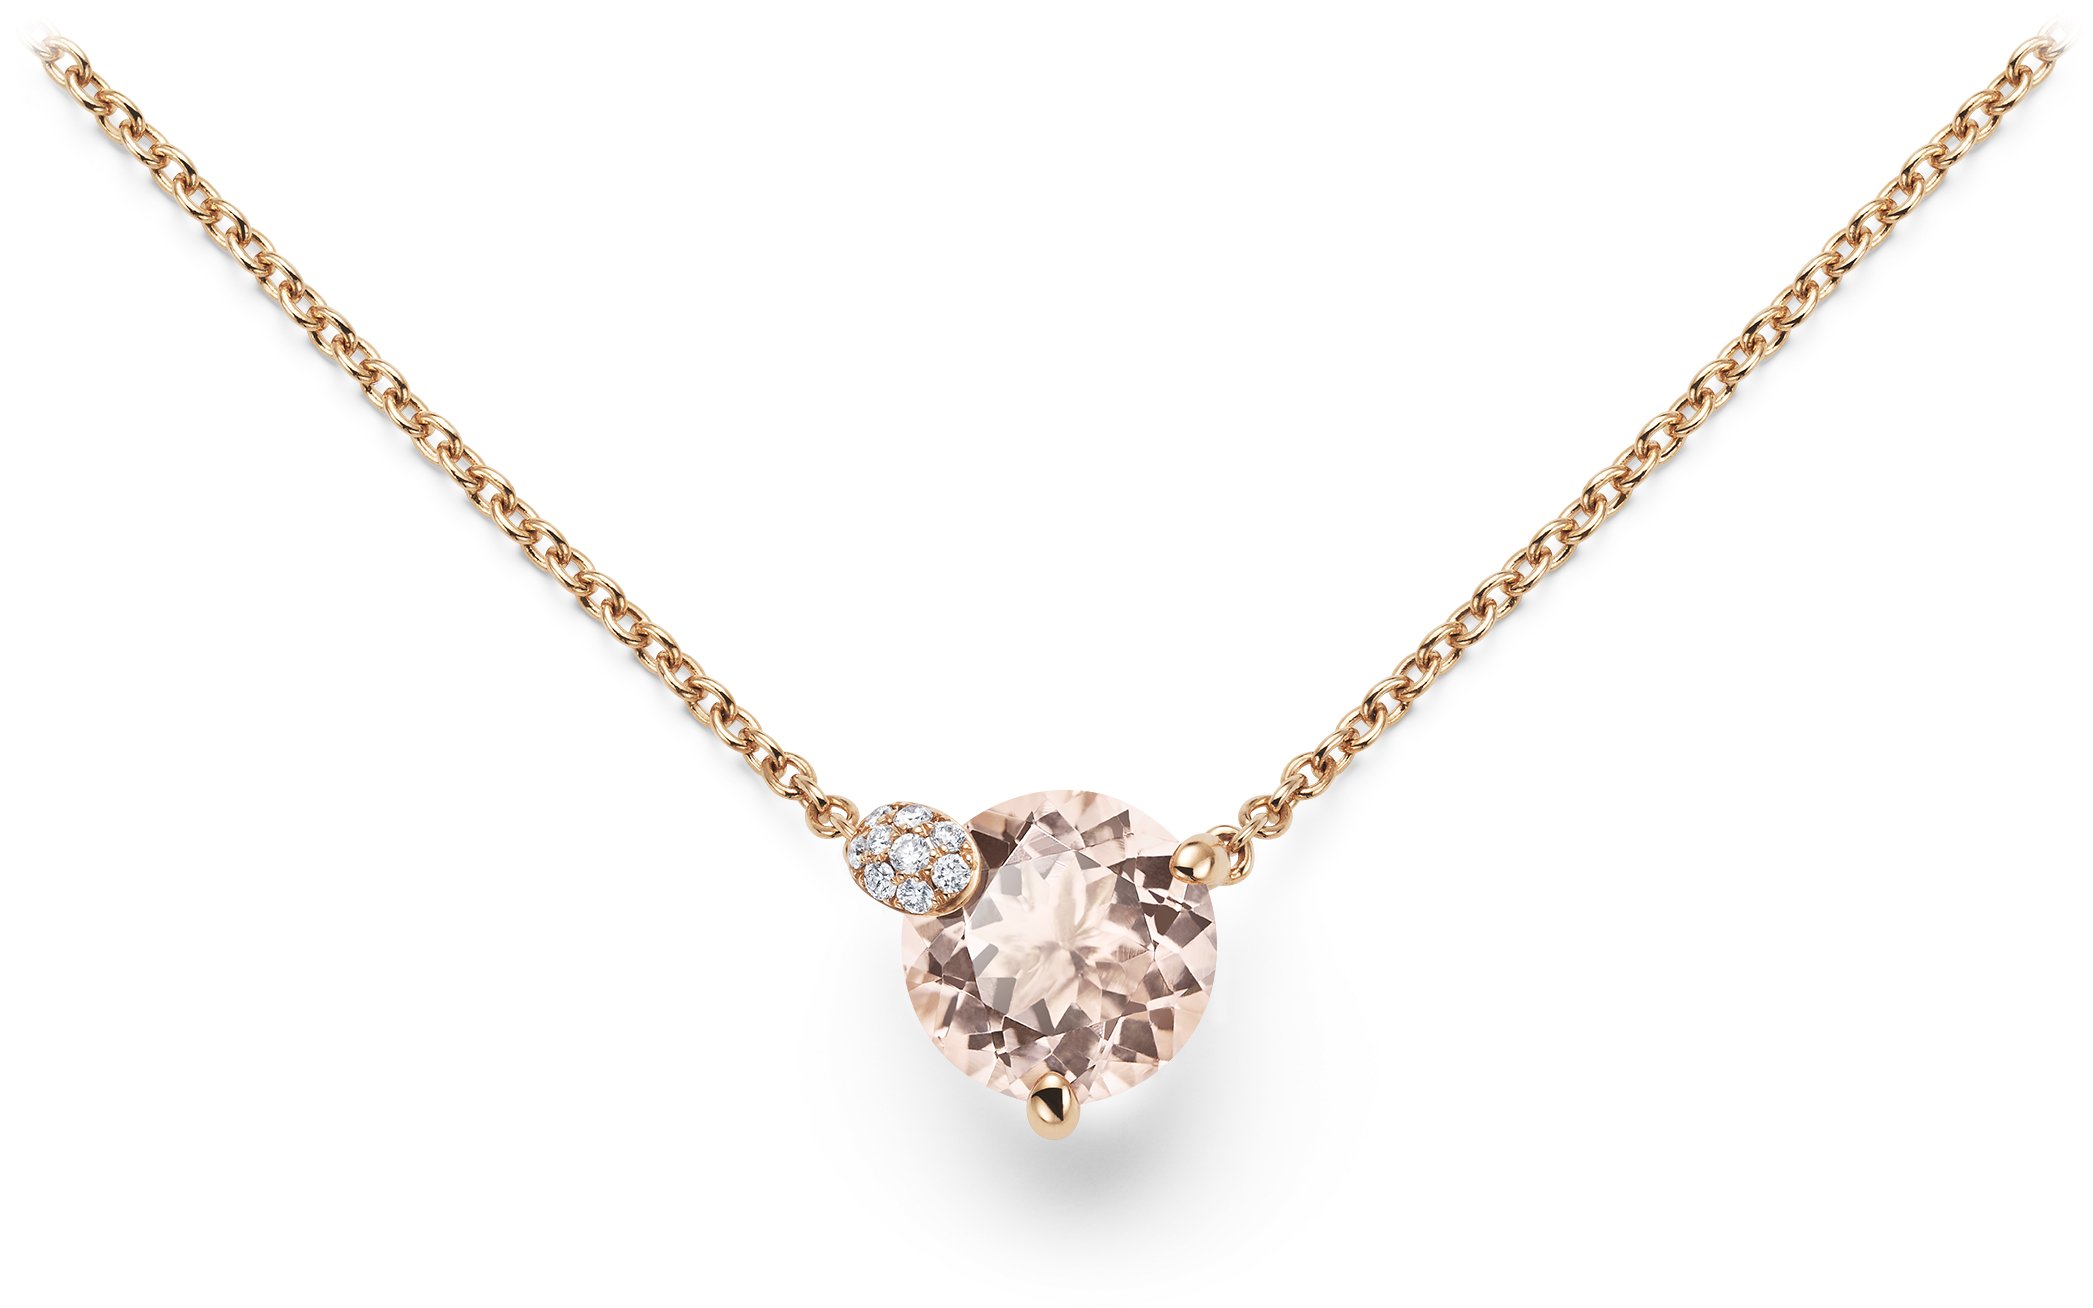 A Gold Necklace With A Pink Stone And Diamonds